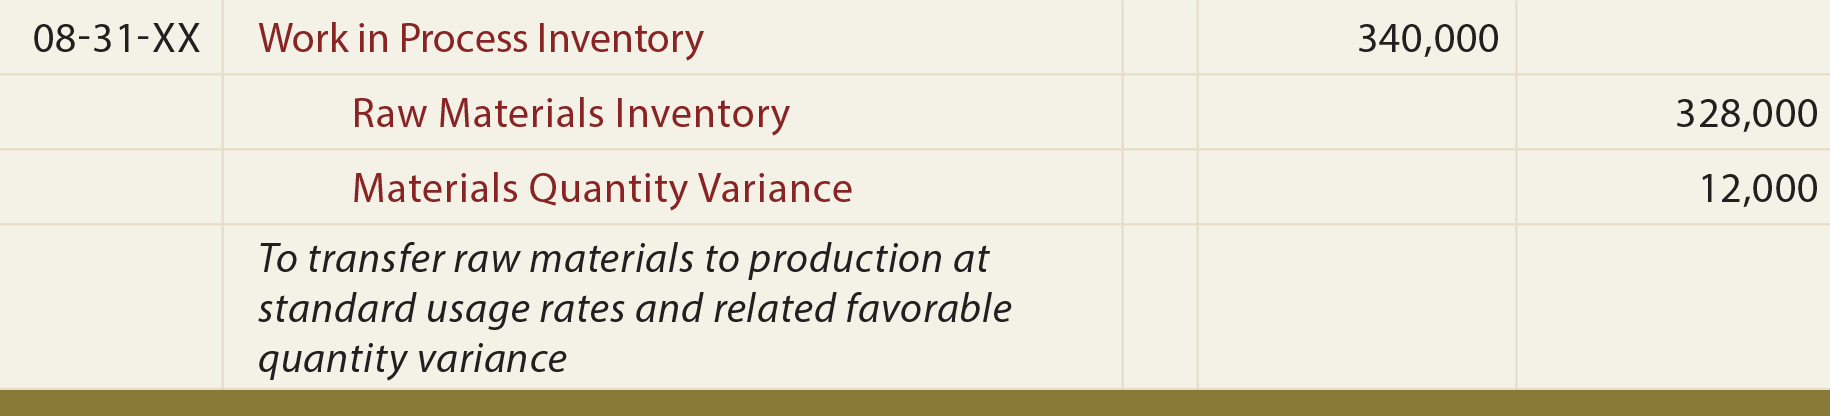 Variance General Journal Entry - To transfer materials and favorable quantity variance